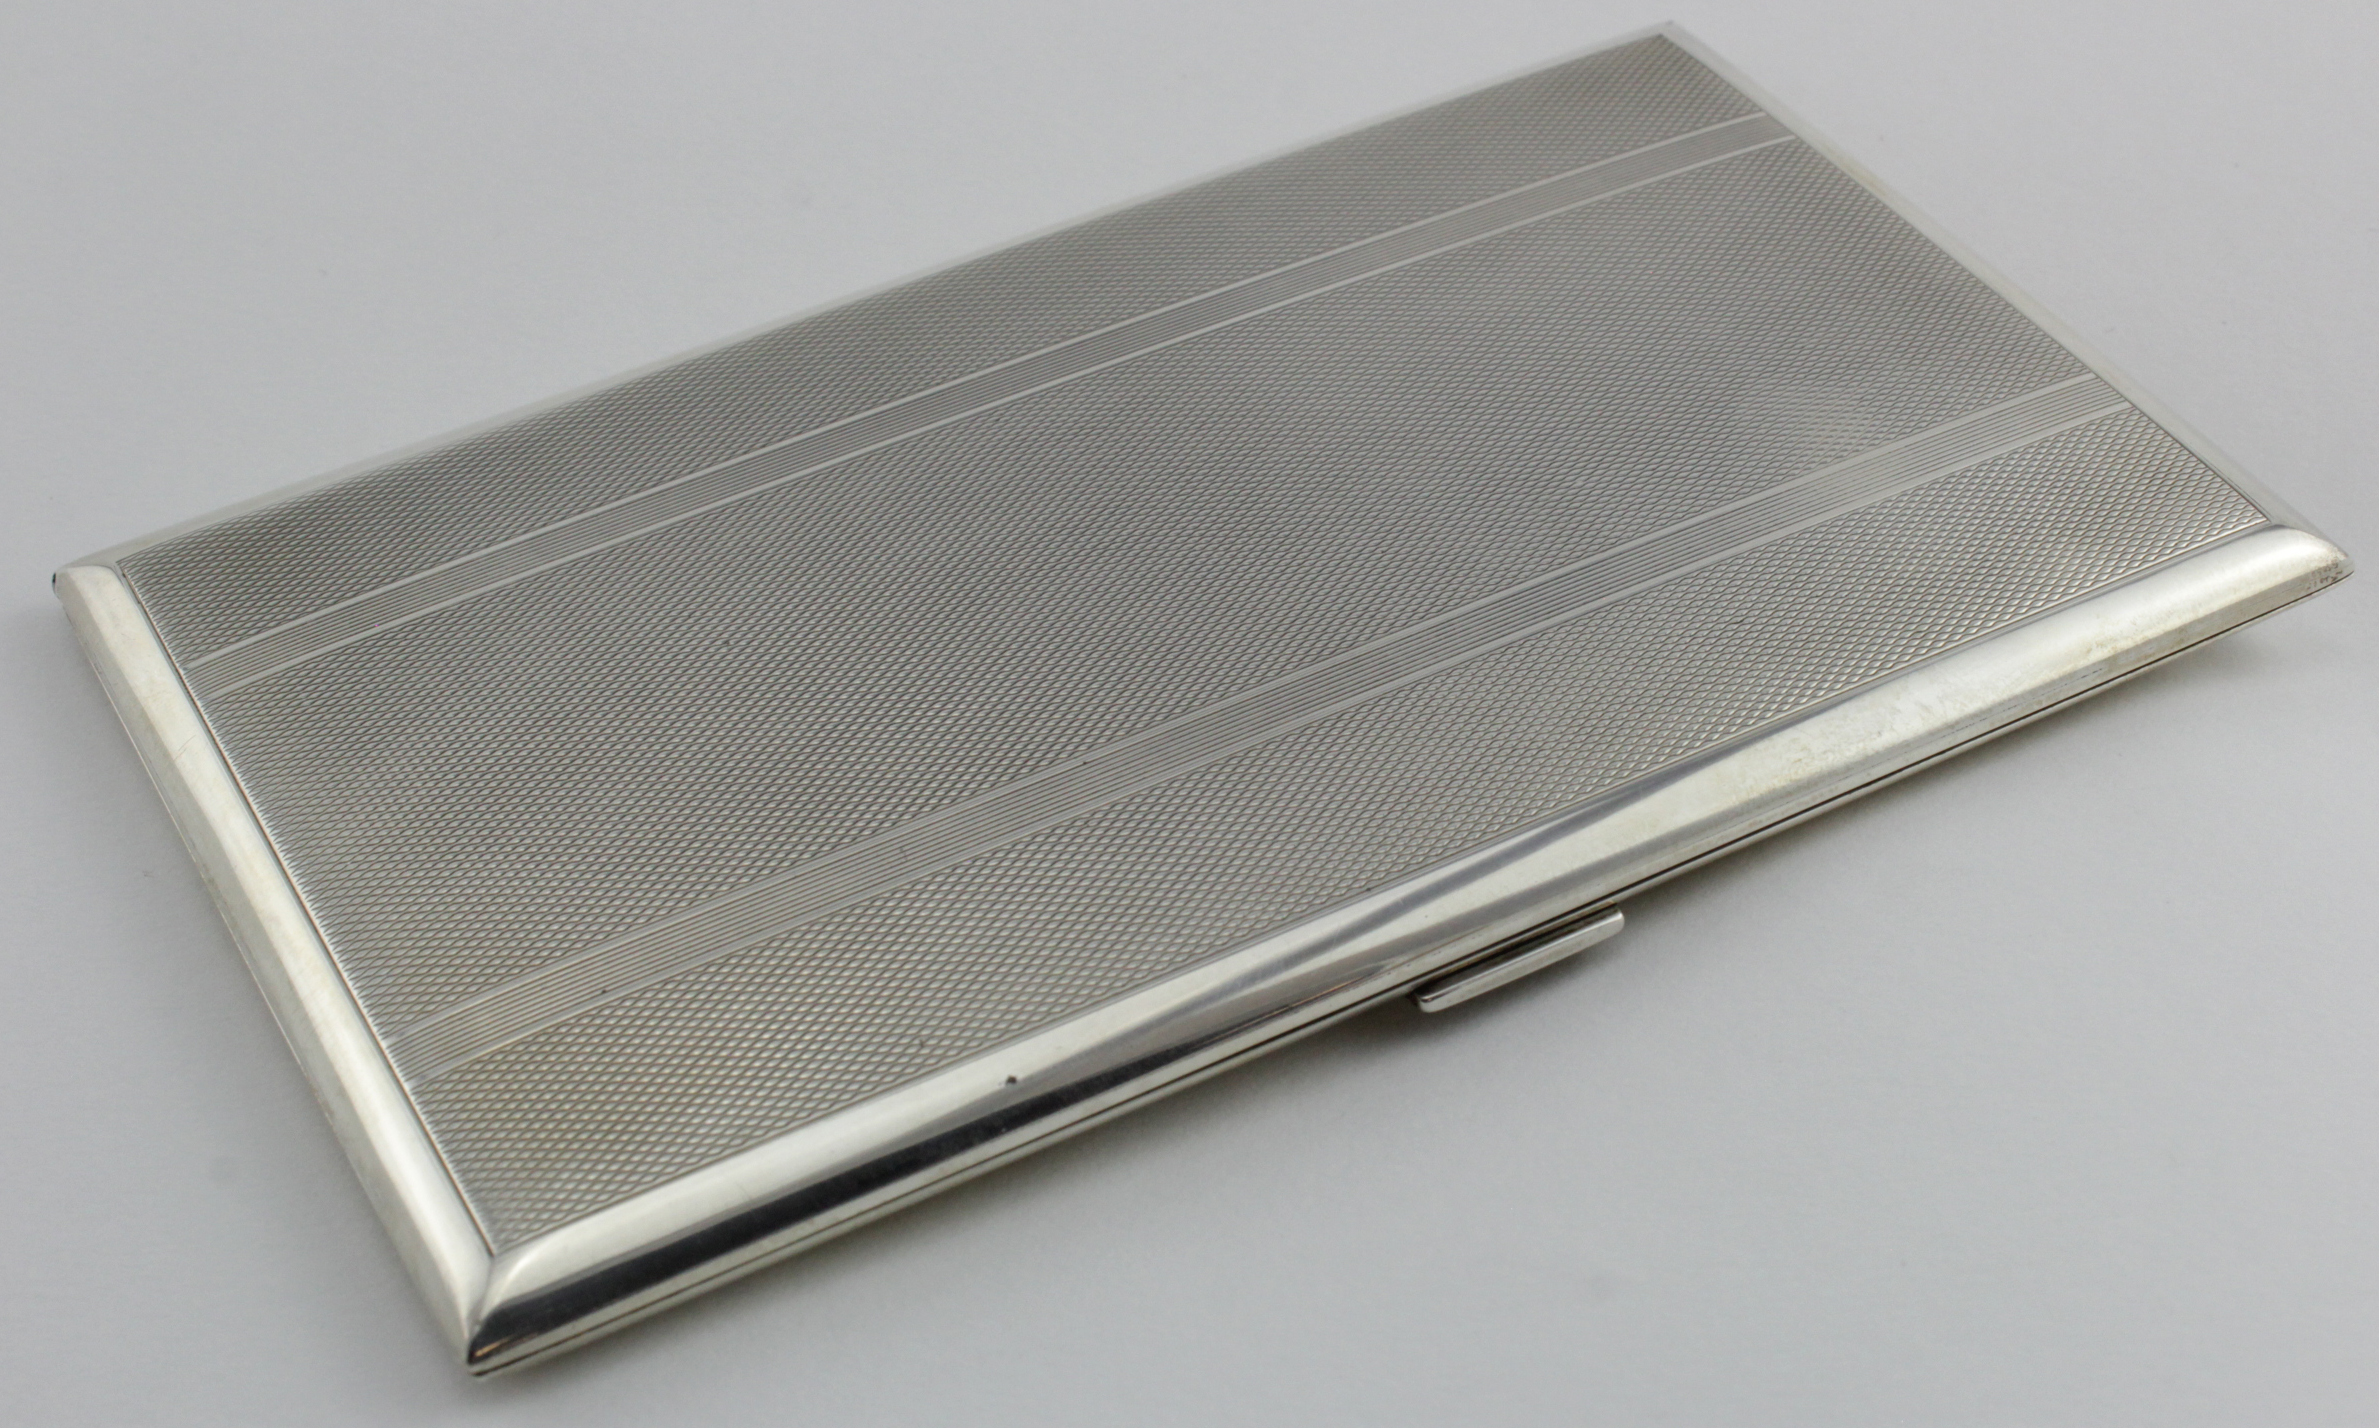 Lovely quality silver engine turned cigarette case - very good condition. Hallmarked S.Ld. (Suckling